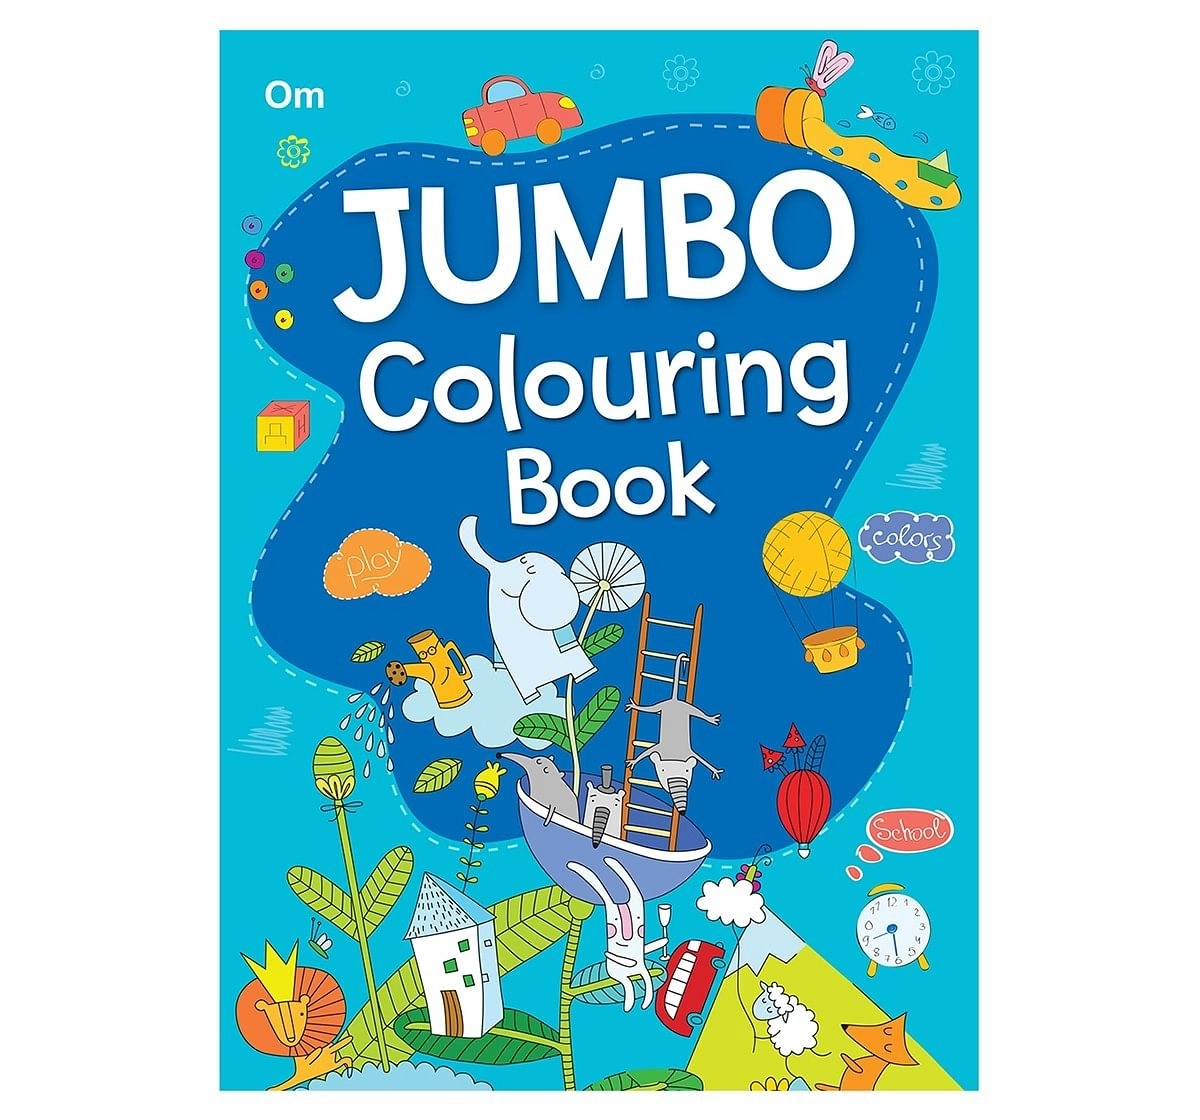 Colouring Book : Jumbo Colouring Book For Kids, 368 Pages Book By Om Books Editorial Team, Paperback